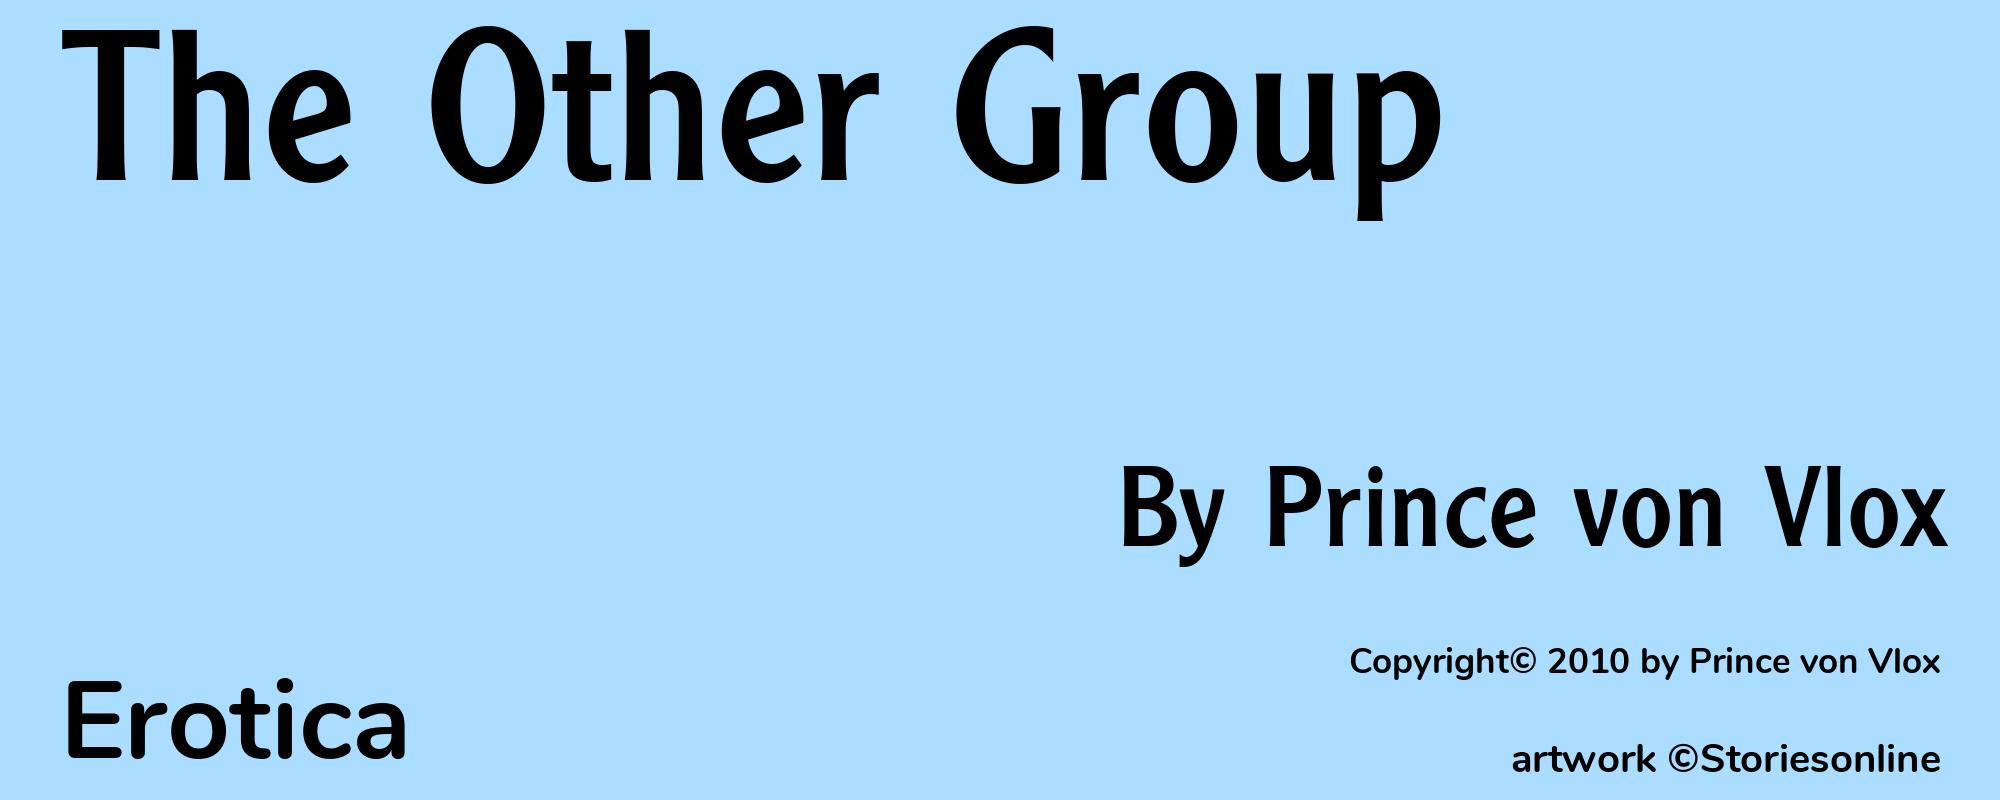 The Other Group - Cover